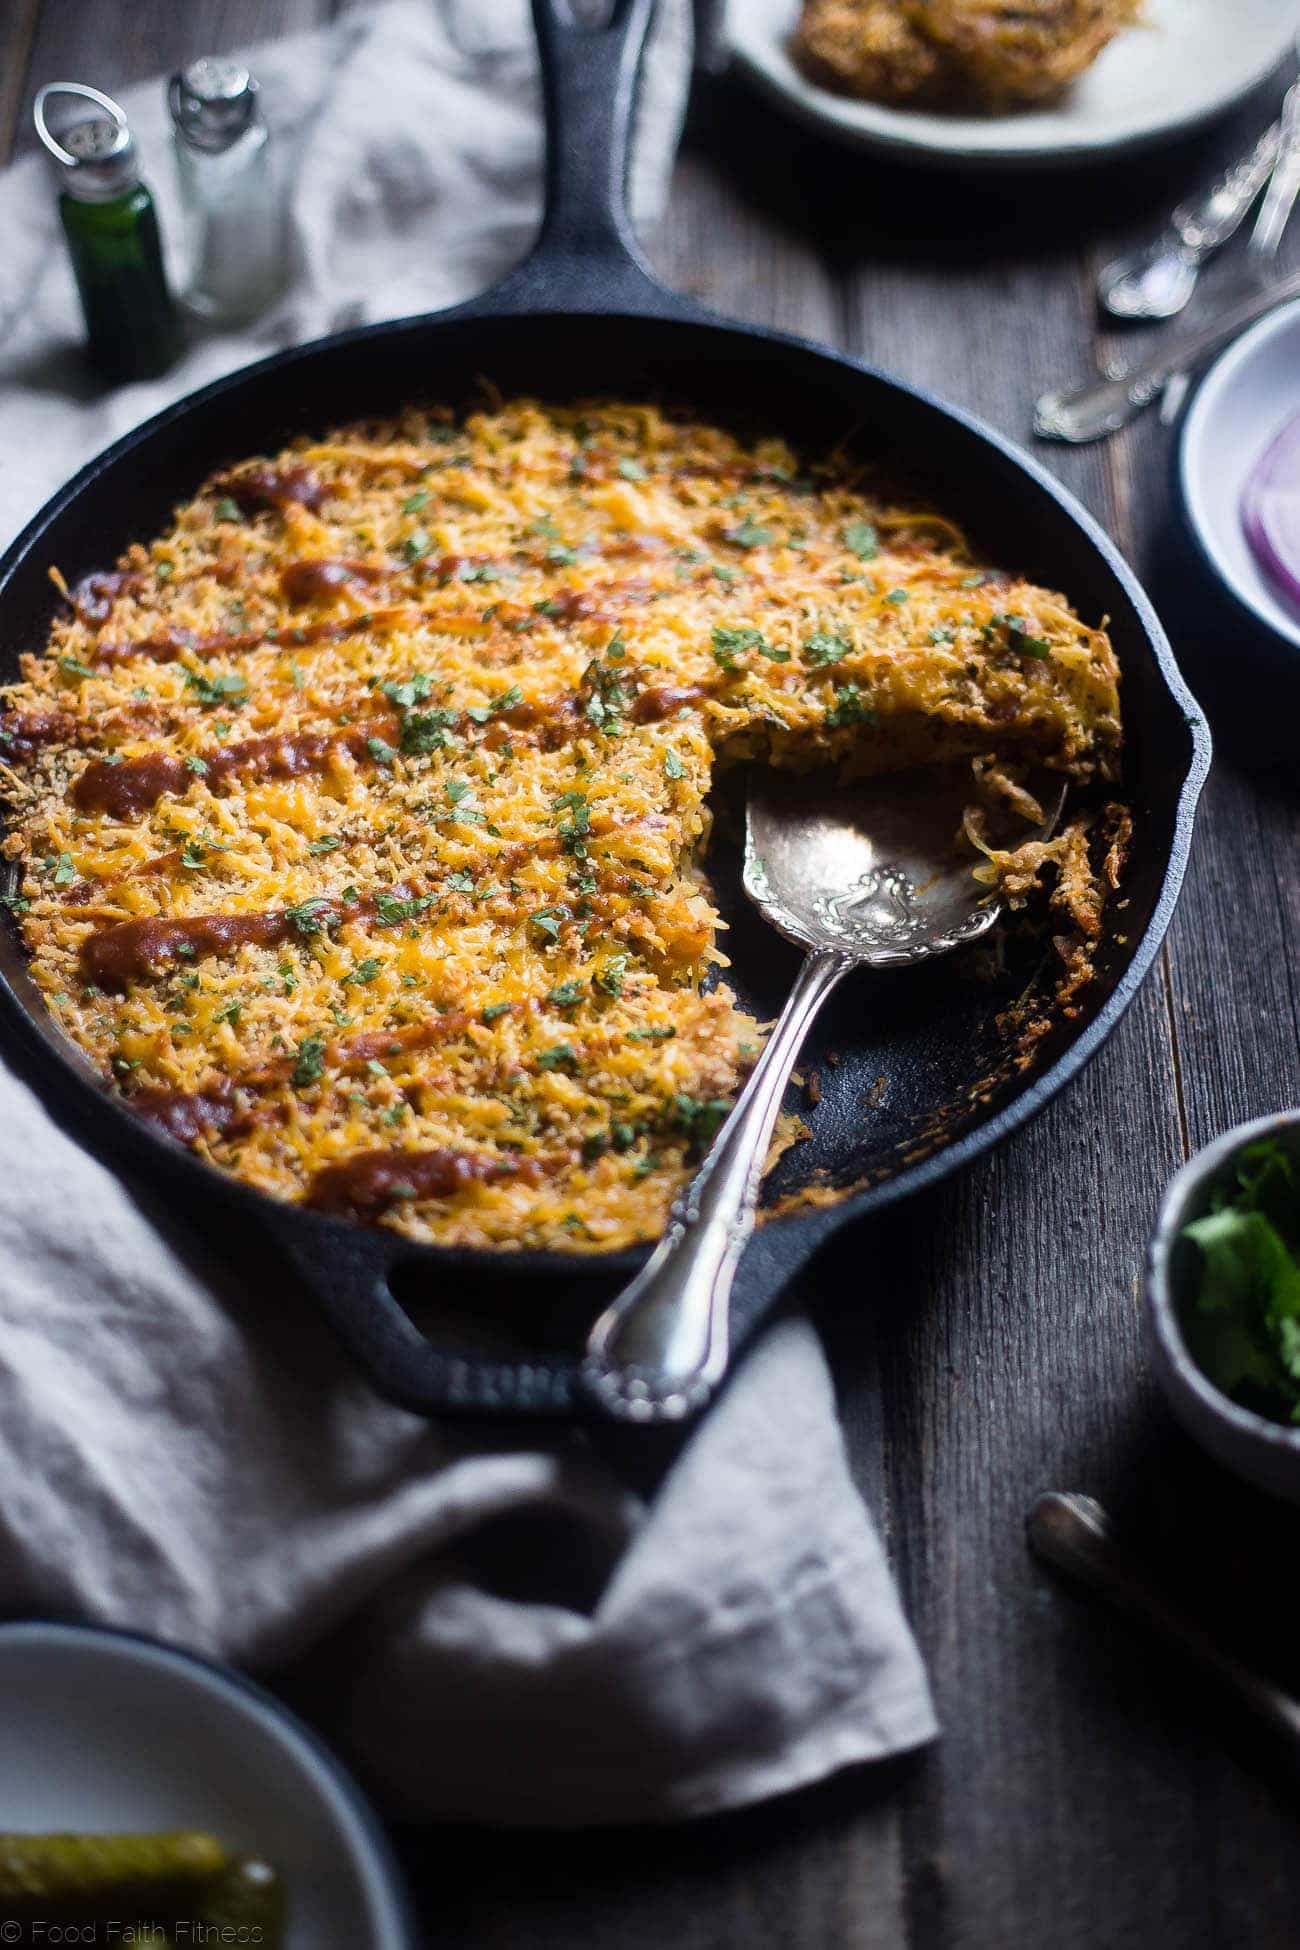 BBQ Baked Chicken Spaghetti Squash Casserole - This low carb, gluten free healthy spaghetti squash casserole is cheesy, flavorful and only 214 calories! It's a kid-friendly, weeknight meal that the whole family will love! | Foodfaithfitness.com | @FoodfaithFit